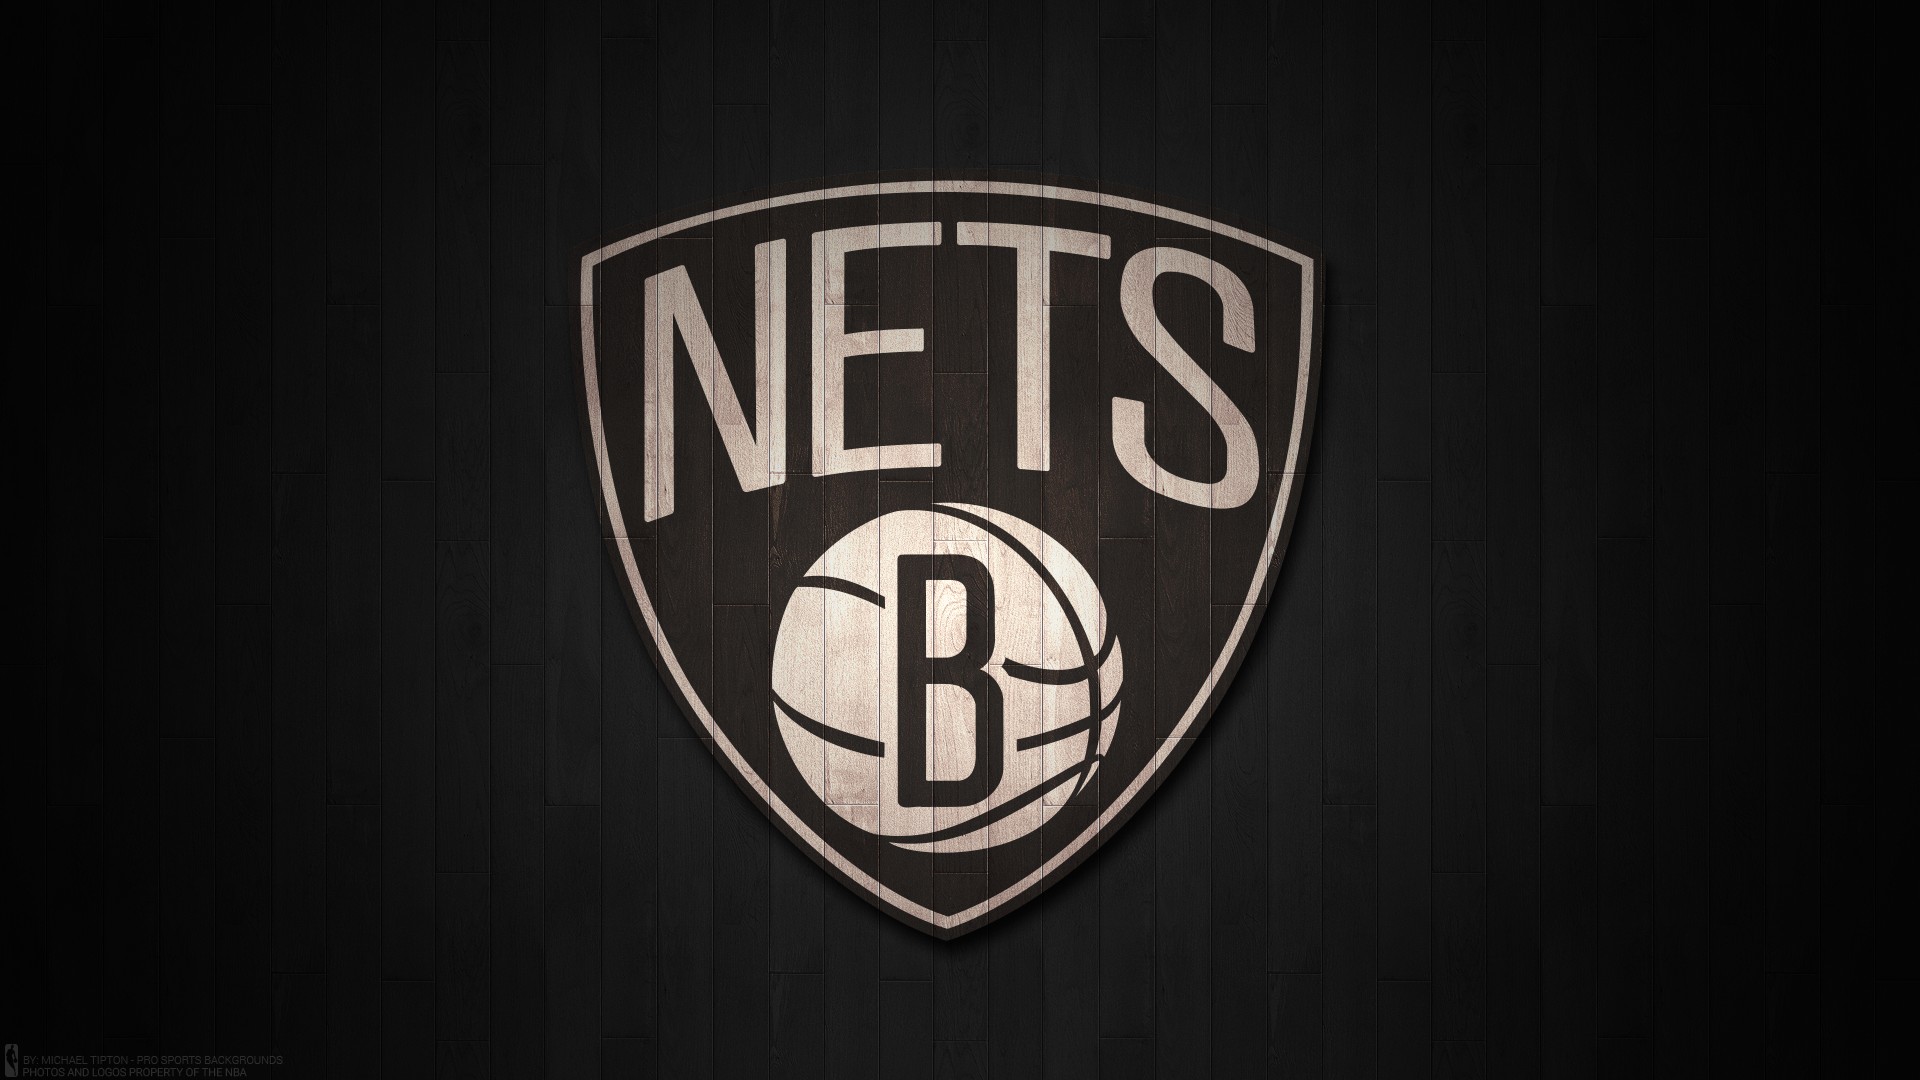 Brooklyn Nets Mac Backgrounds with image dimensions 1920x1080 pixel. You can make this wallpaper for your Desktop Computer Backgrounds, Windows or Mac Screensavers, iPhone Lock screen, Tablet or Android and another Mobile Phone device